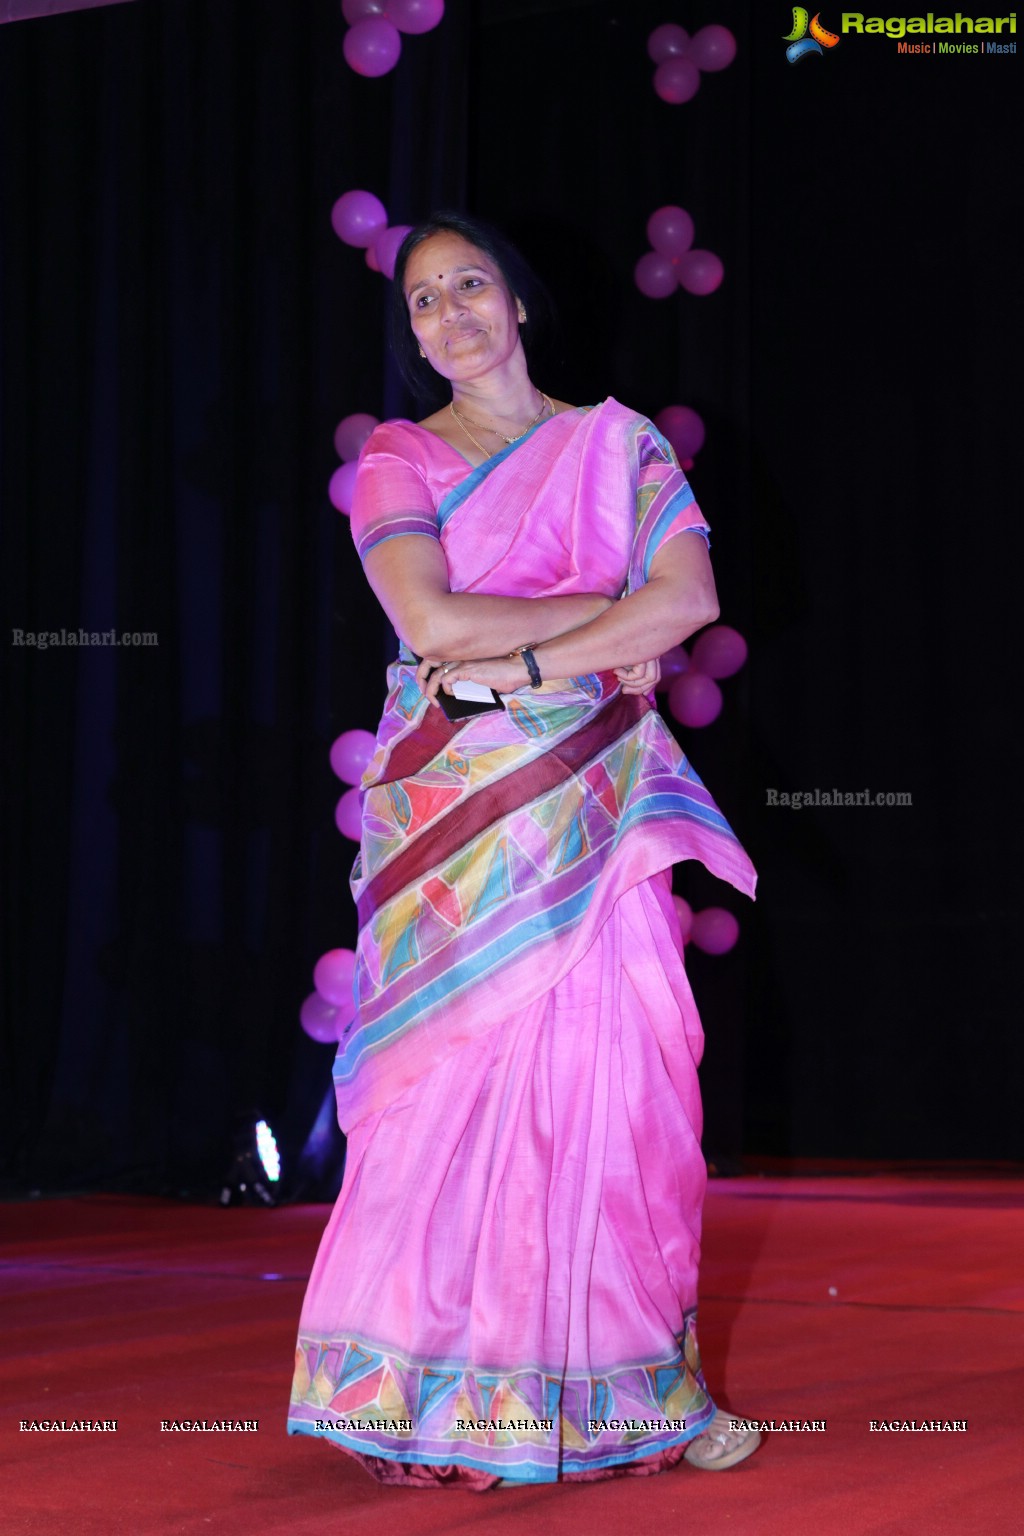 Women Be Victorious - Breast Cancer Awareness and Women Empowerment - Interactive Session by Doctors at Ravindra Bharathi